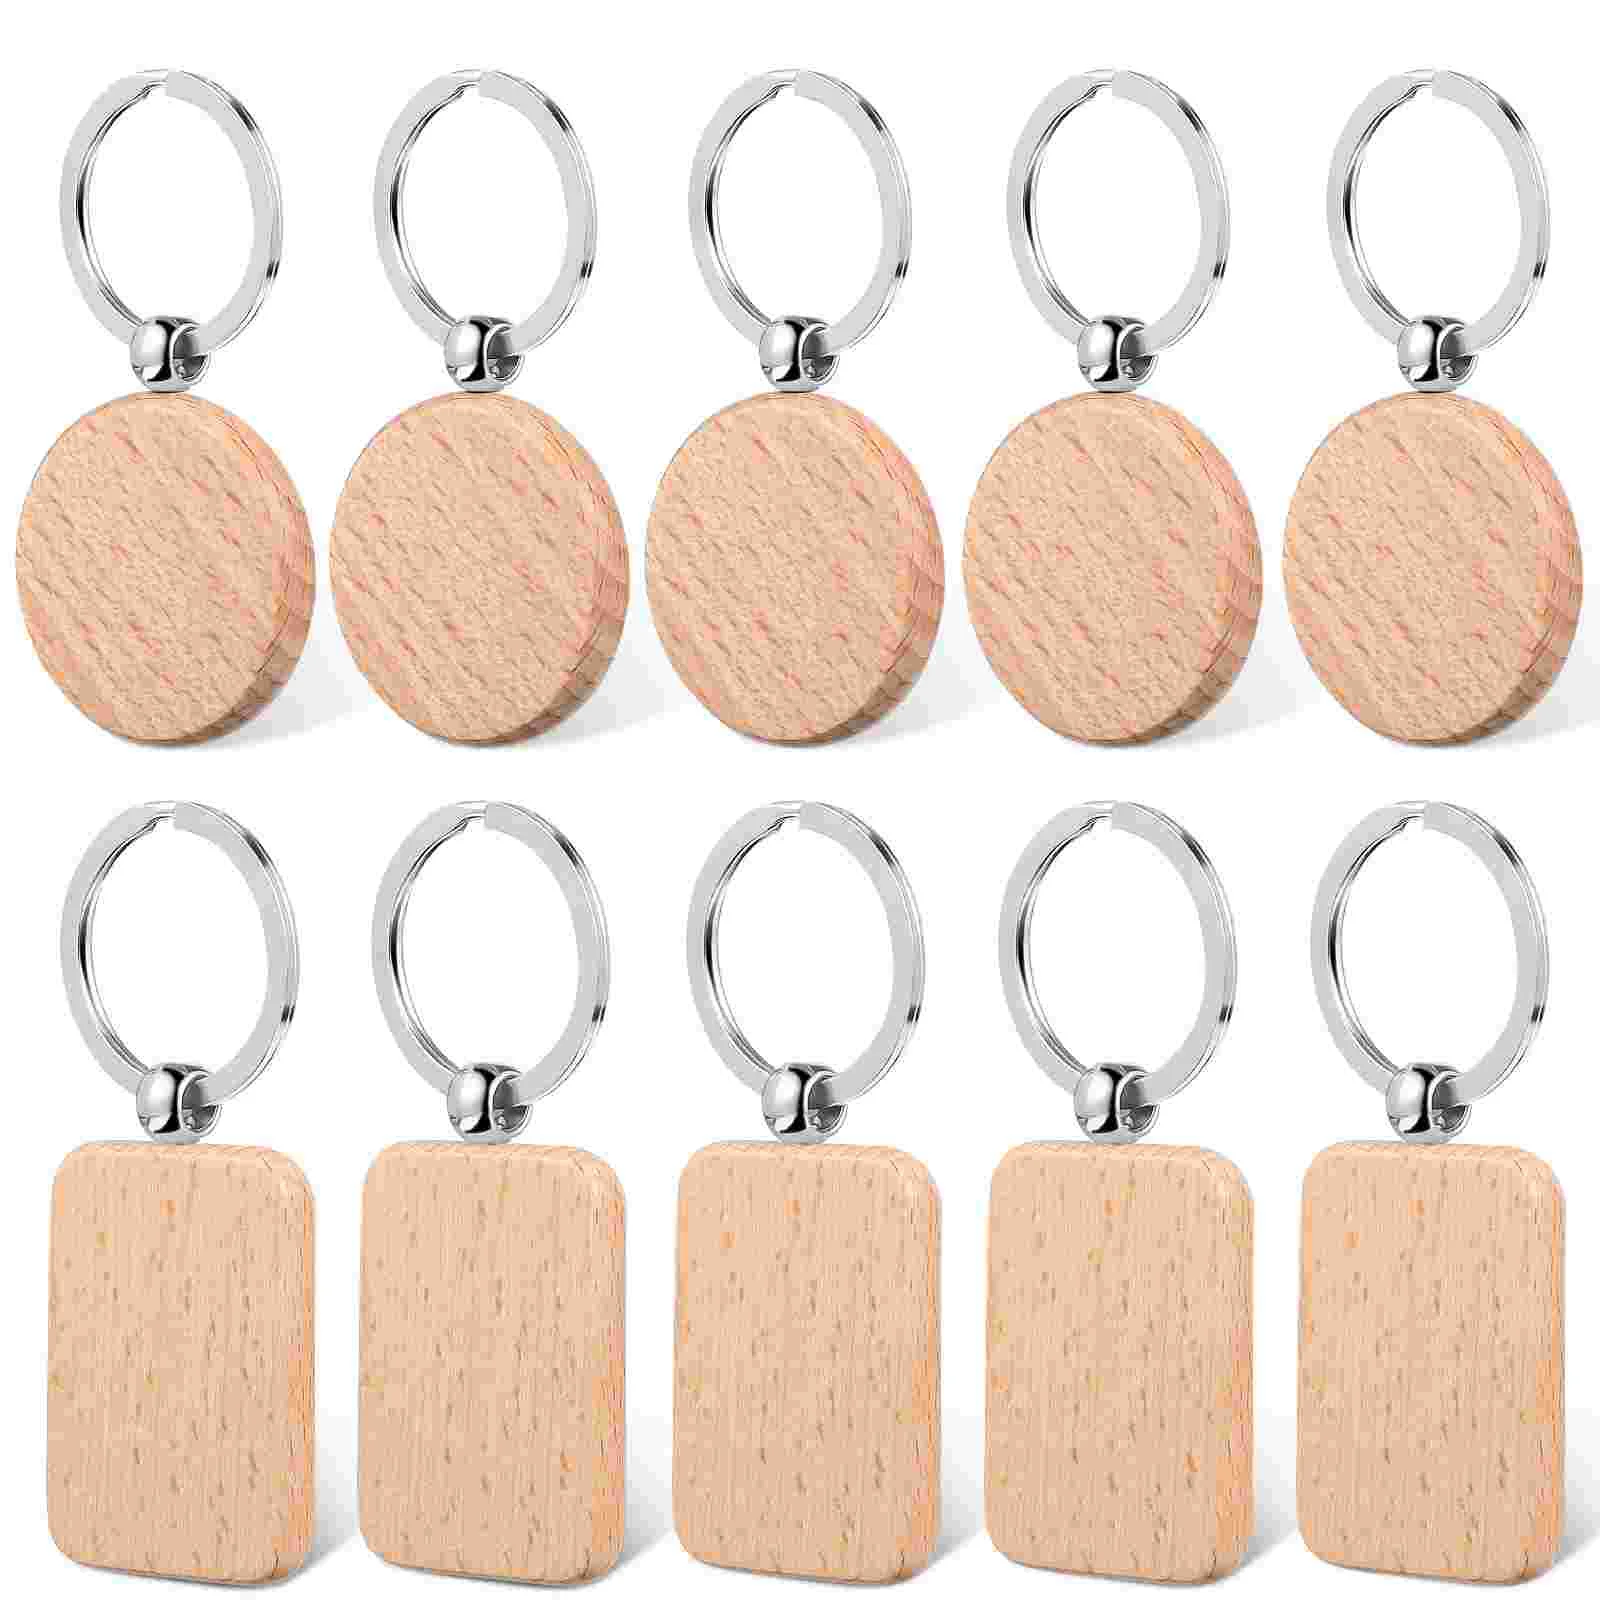 

10 Pcs Wooden Keychain Blanks Round Blank Wooden Key Tag Keychains Rectangle and Round Shape Wood Pendant Keyrings